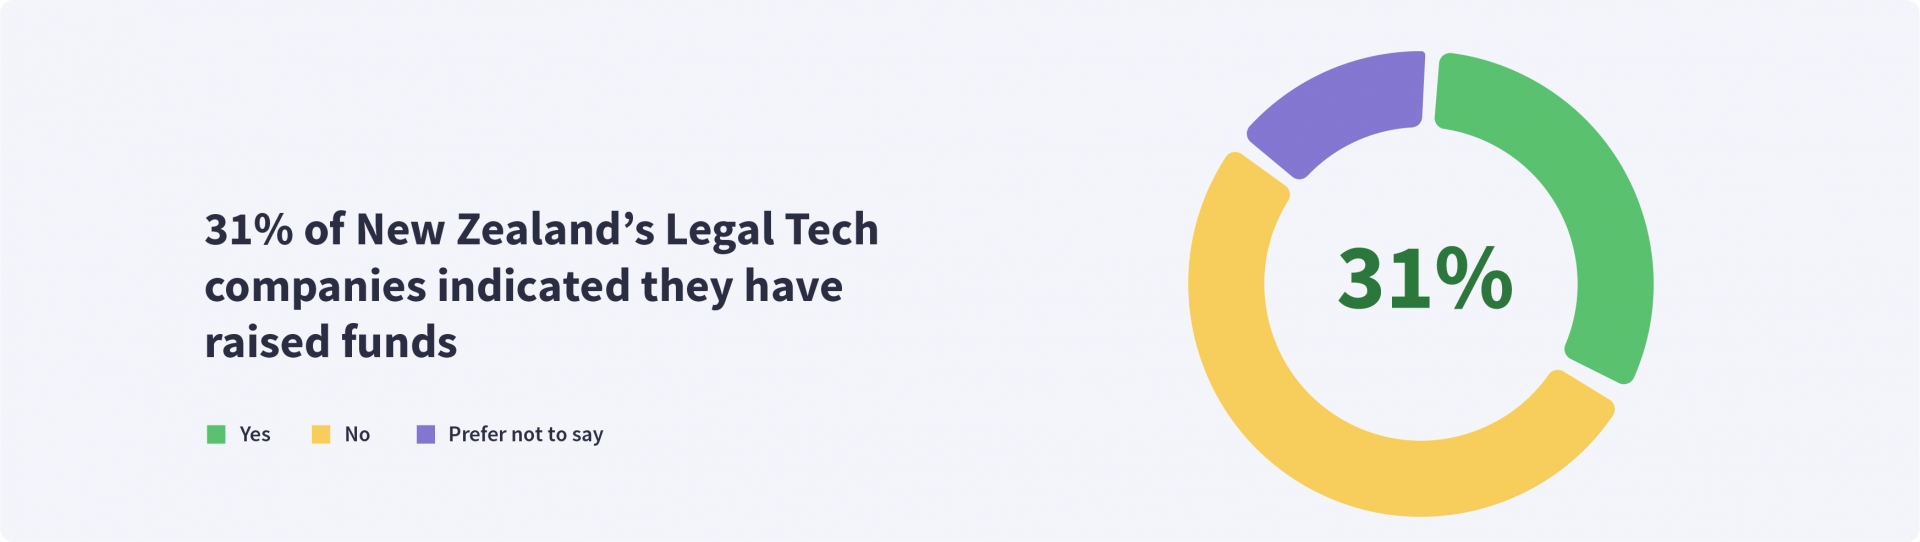 31% of New Zealand's legal tech companies indicated they have raised funds